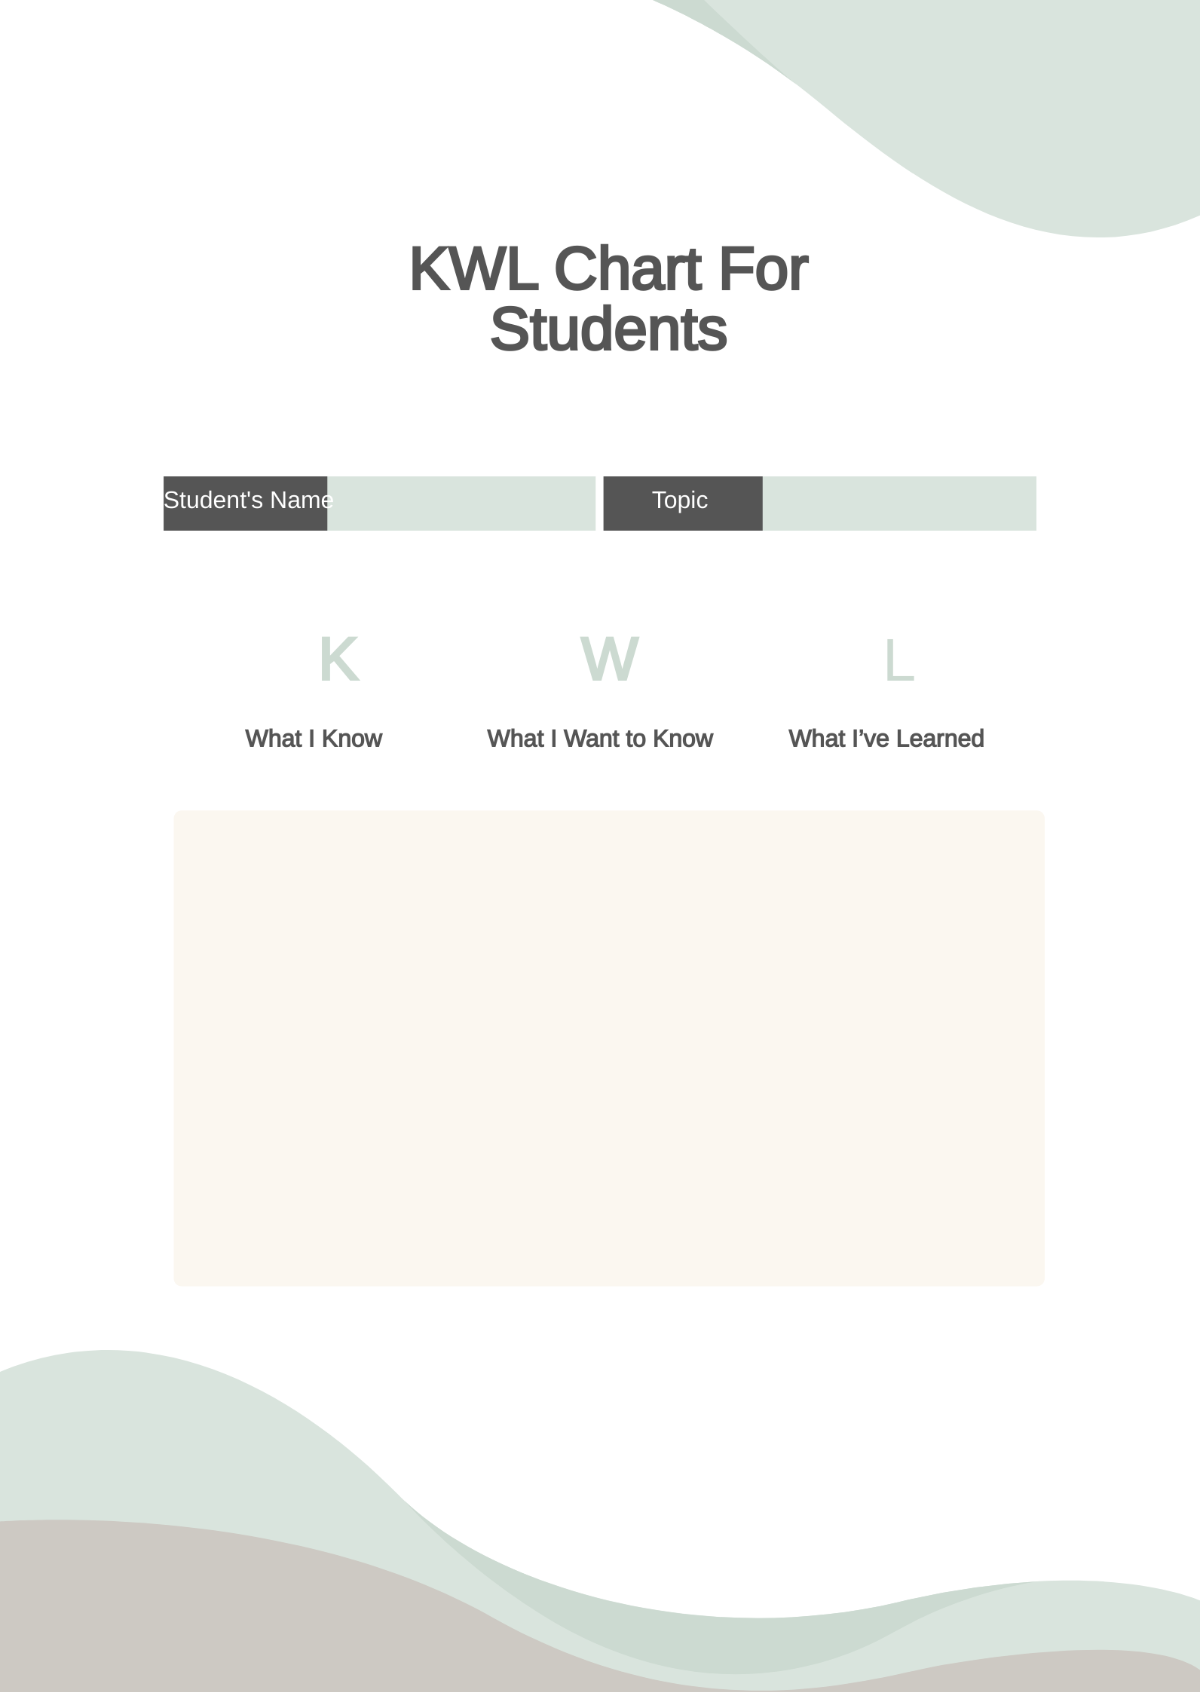 KWL Chart For Students